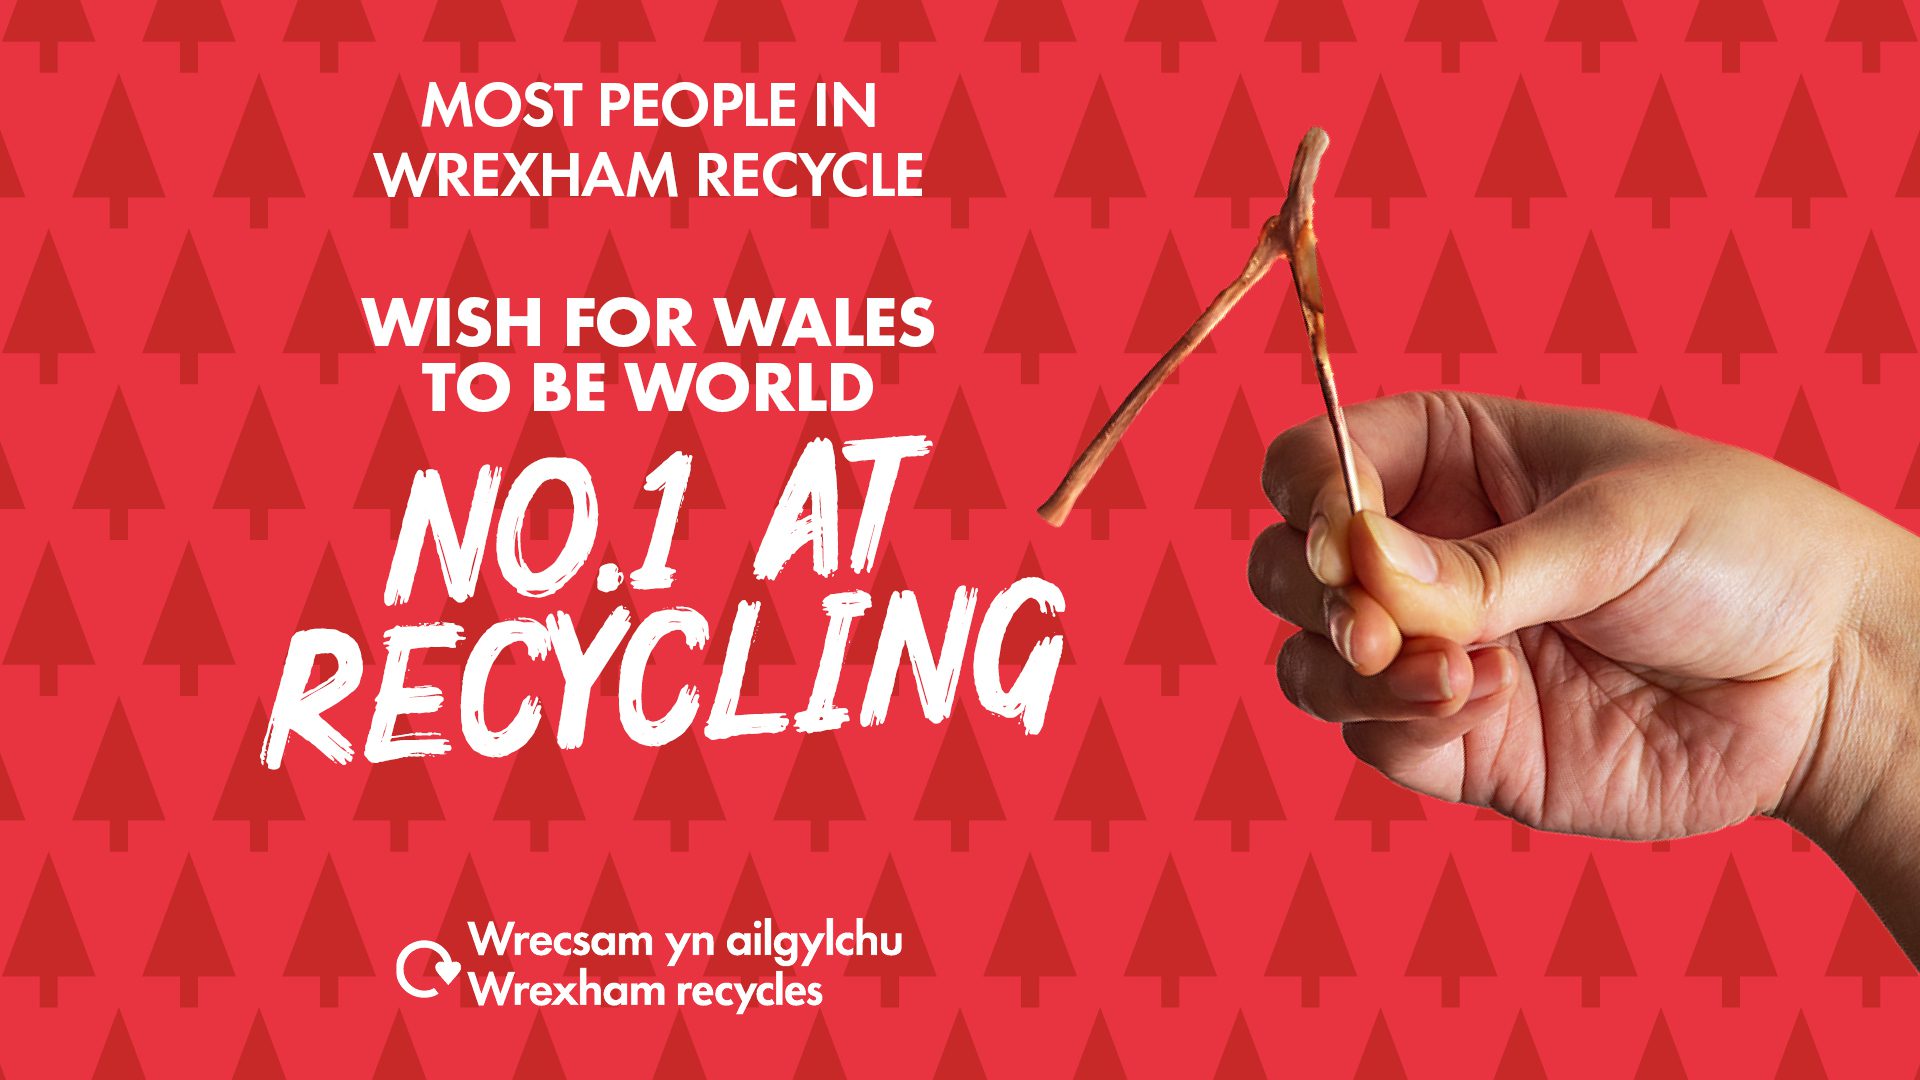 Get Wales to number 1 for recycling